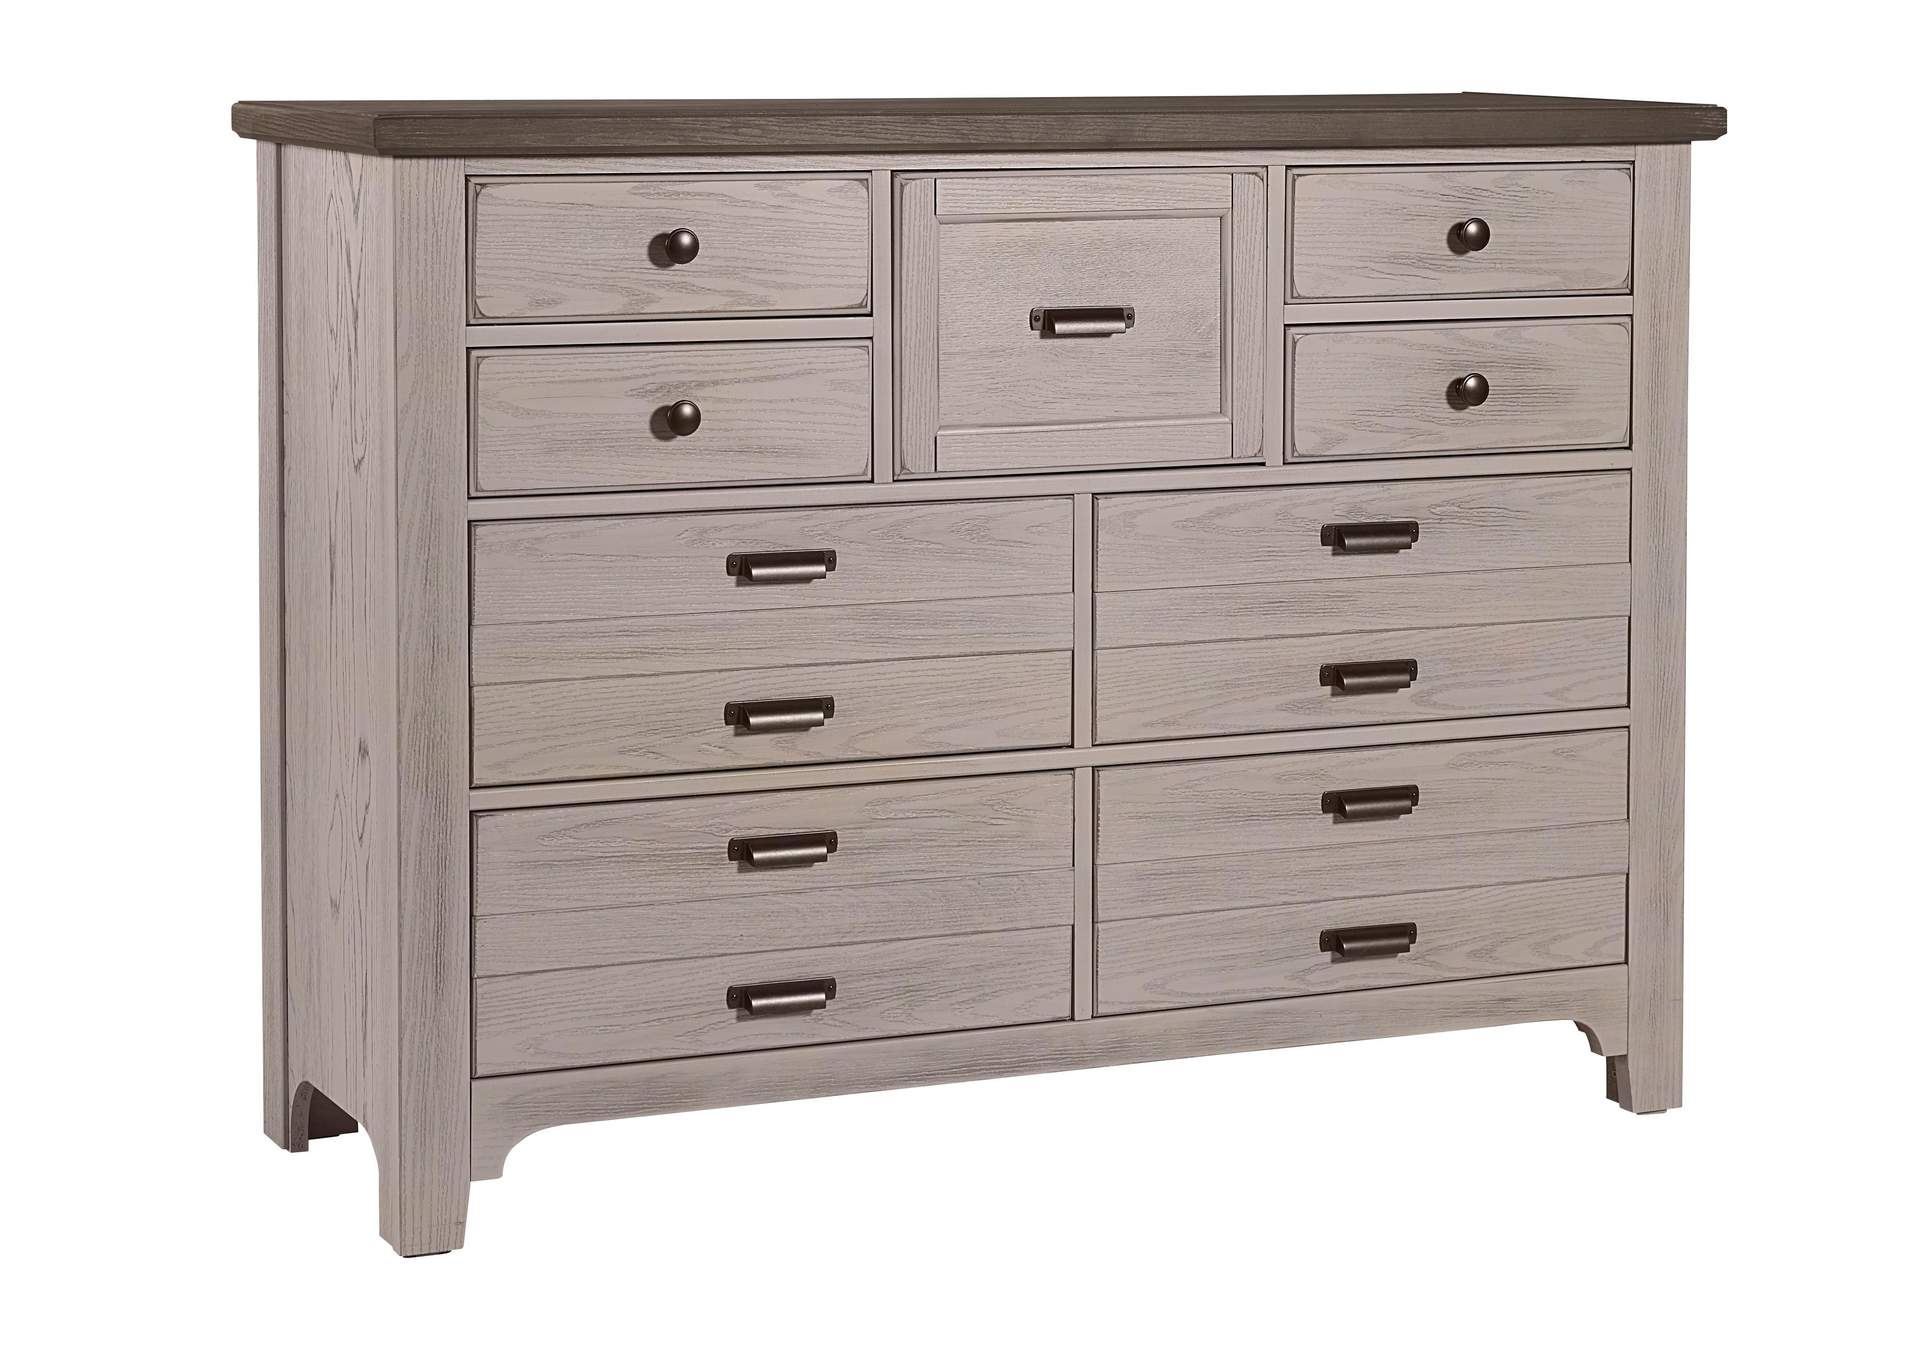 Bungalow Dover Grey with Folkstone Top Master Dresser - 9 Drawer